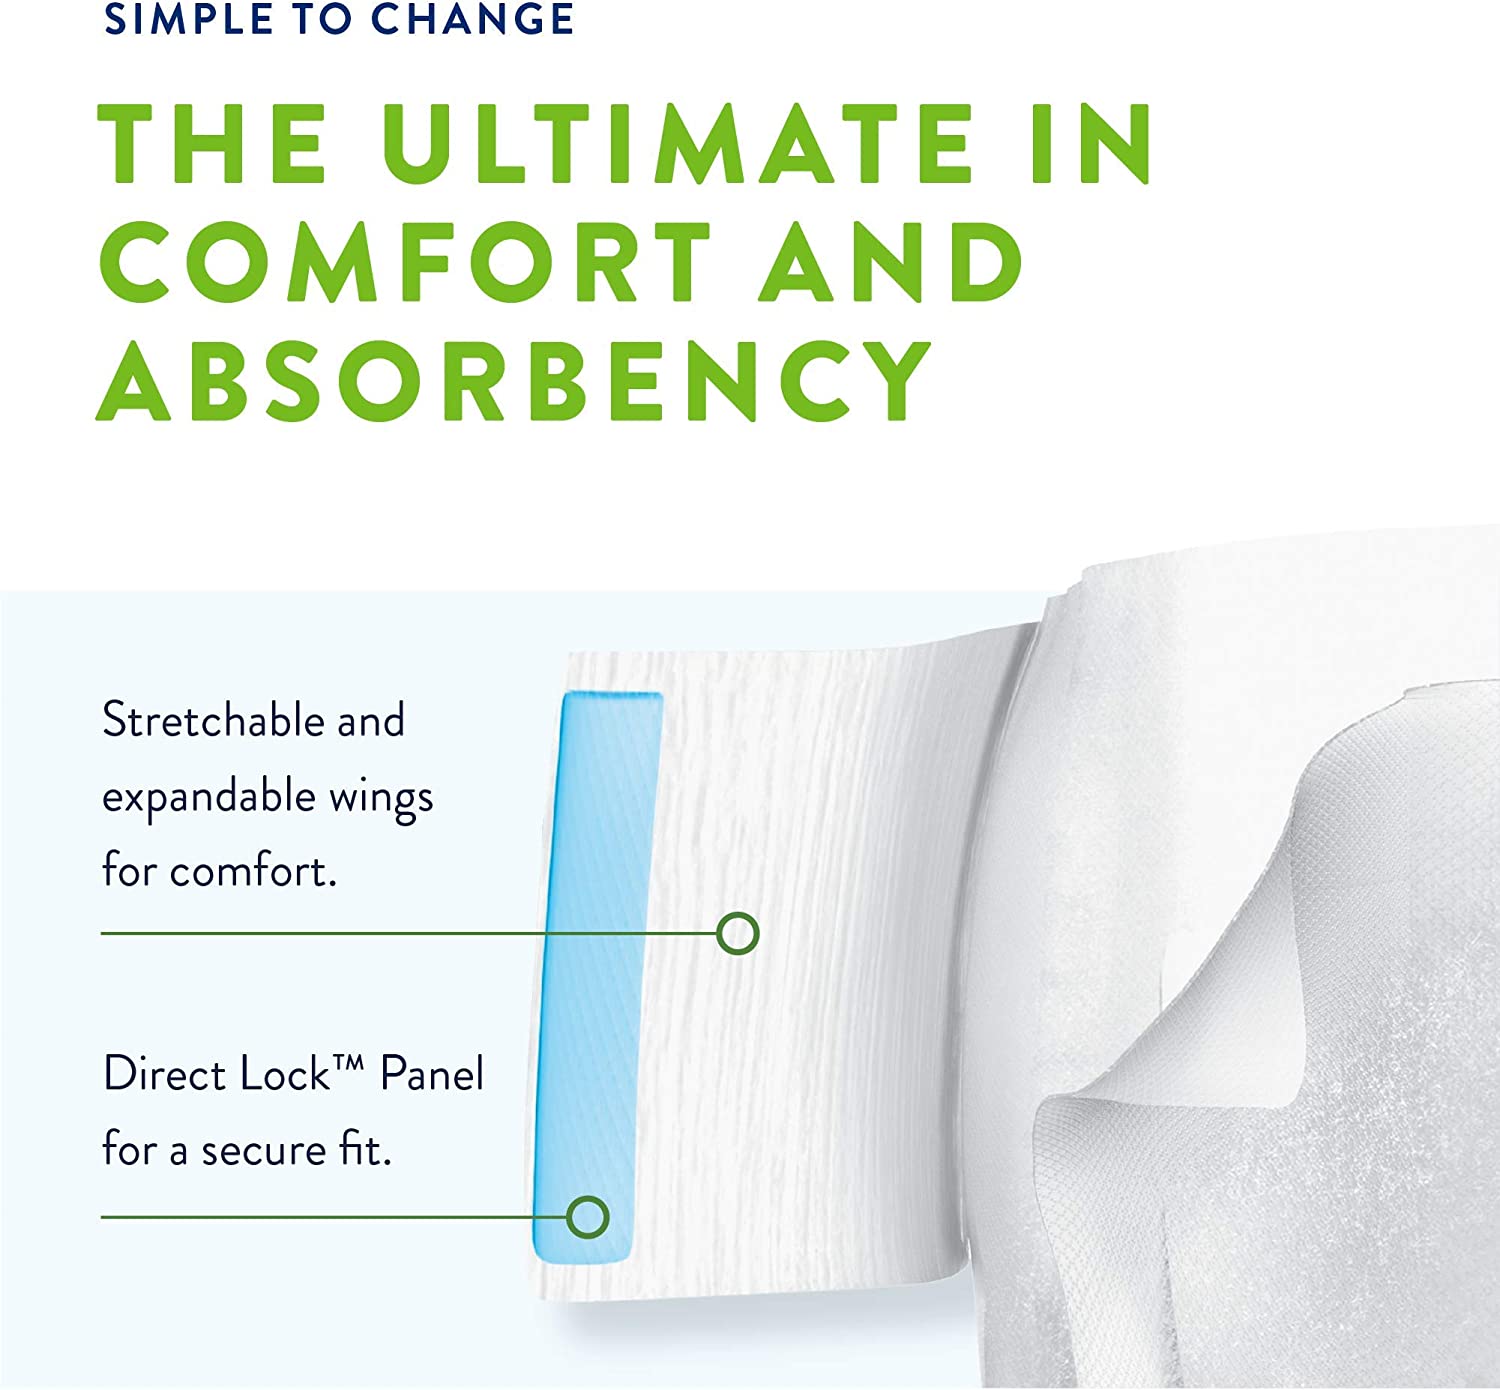 Prevail Women's Daily Incontinence Underwear, Maximum Absorbency - Size  Medium - Simply Medical